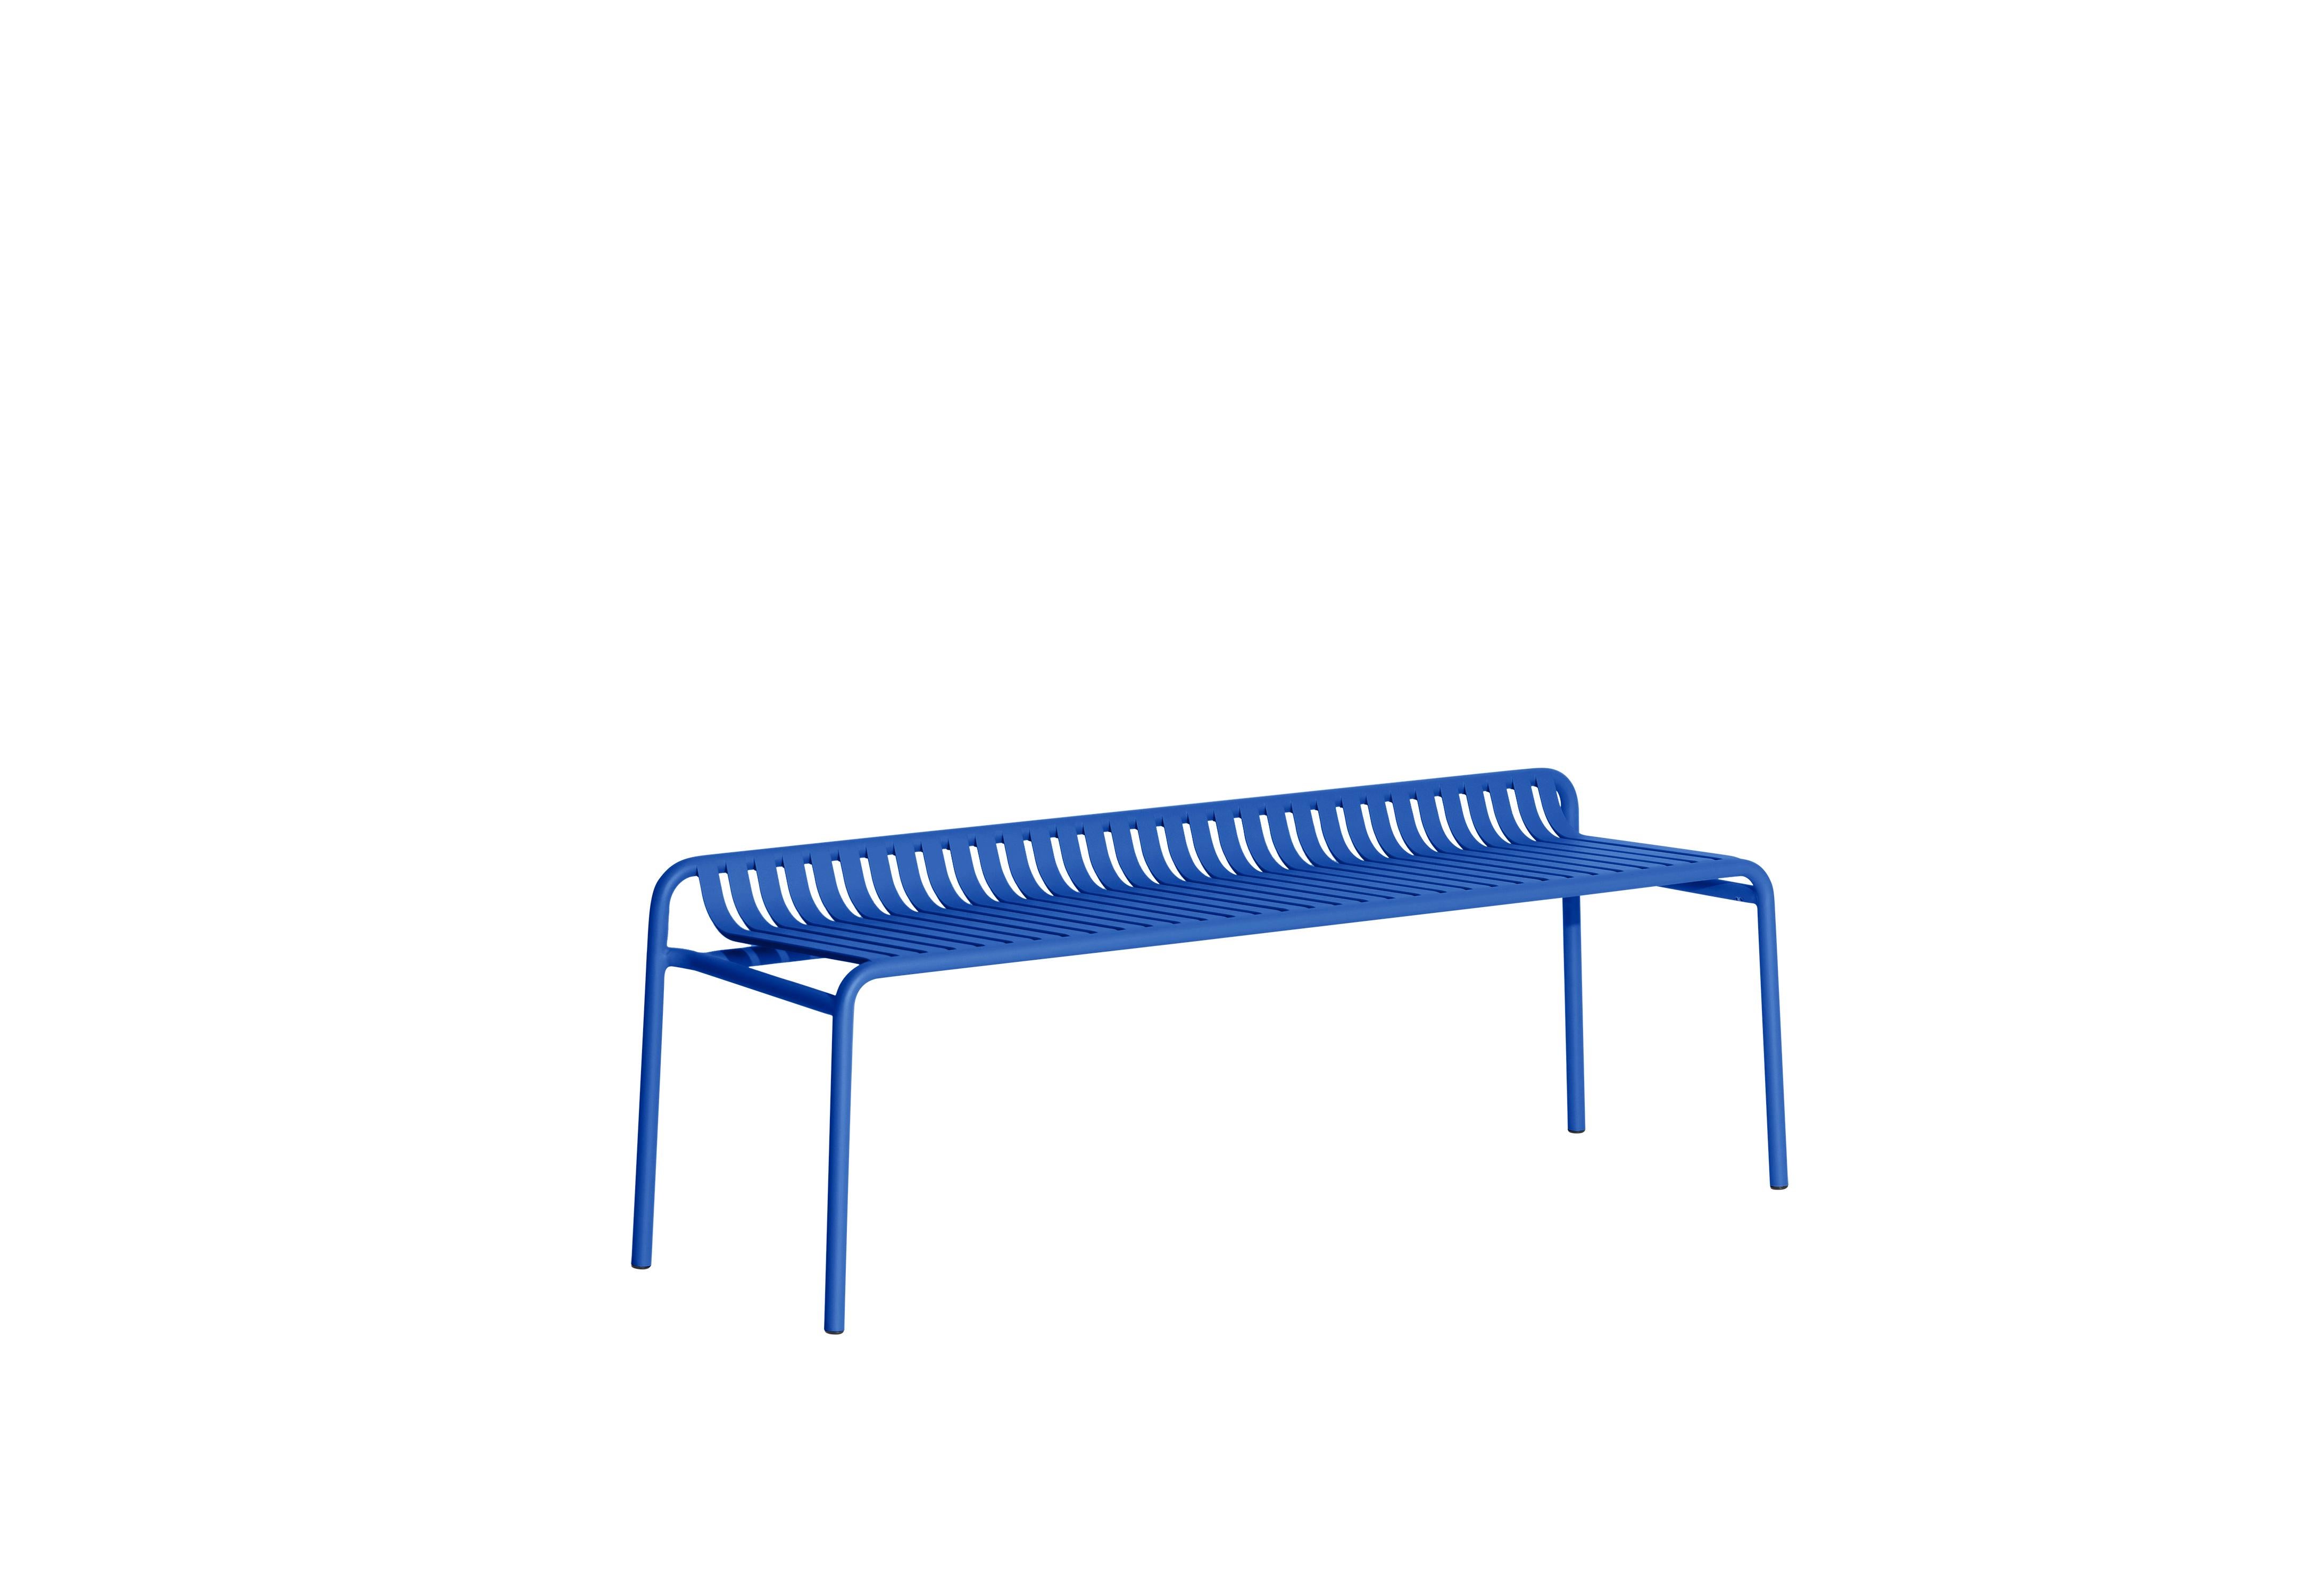 Petite Friture Week-End Bench without Back in Blue Aluminium by Studio BrichetZiegler, 2017

The week-end collection is a full range of outdoor furniture, in aluminium grained epoxy paint, matt finish, that includes 18 functions and 8 colours for